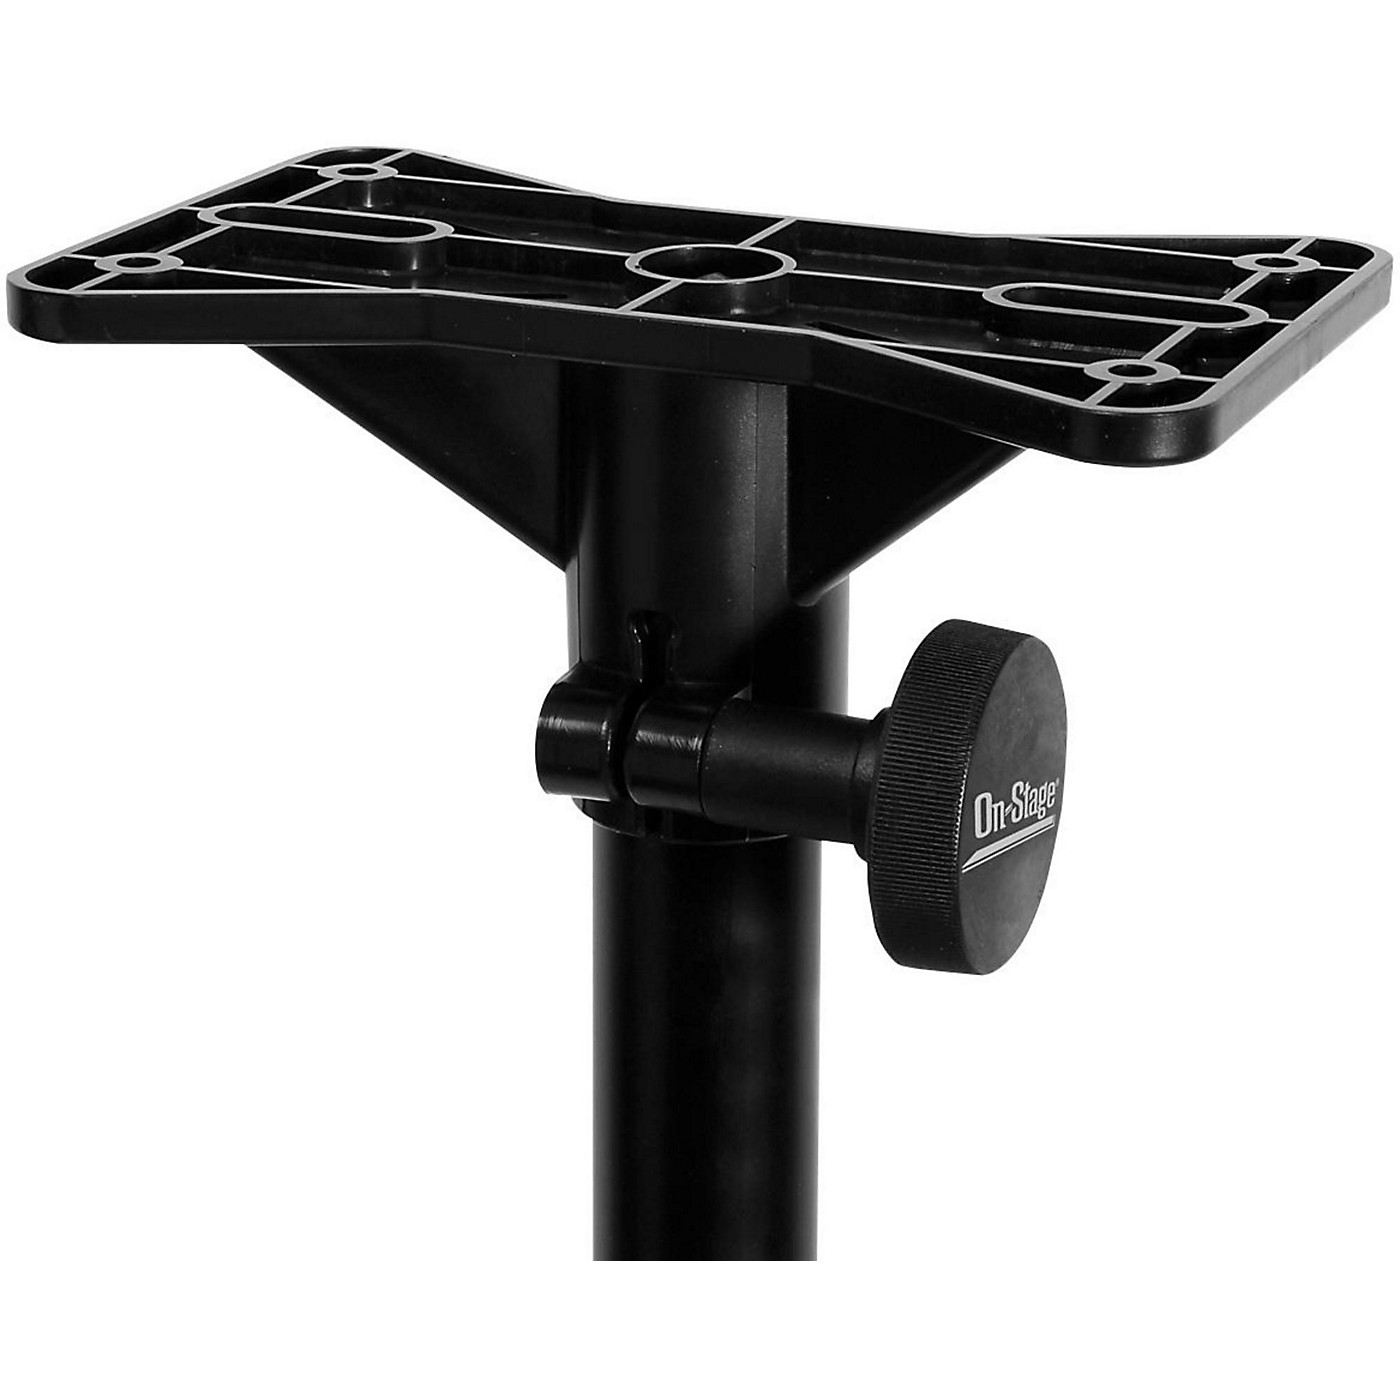 On-Stage Stands EB9760B Exterior Mounting Bracket thumbnail